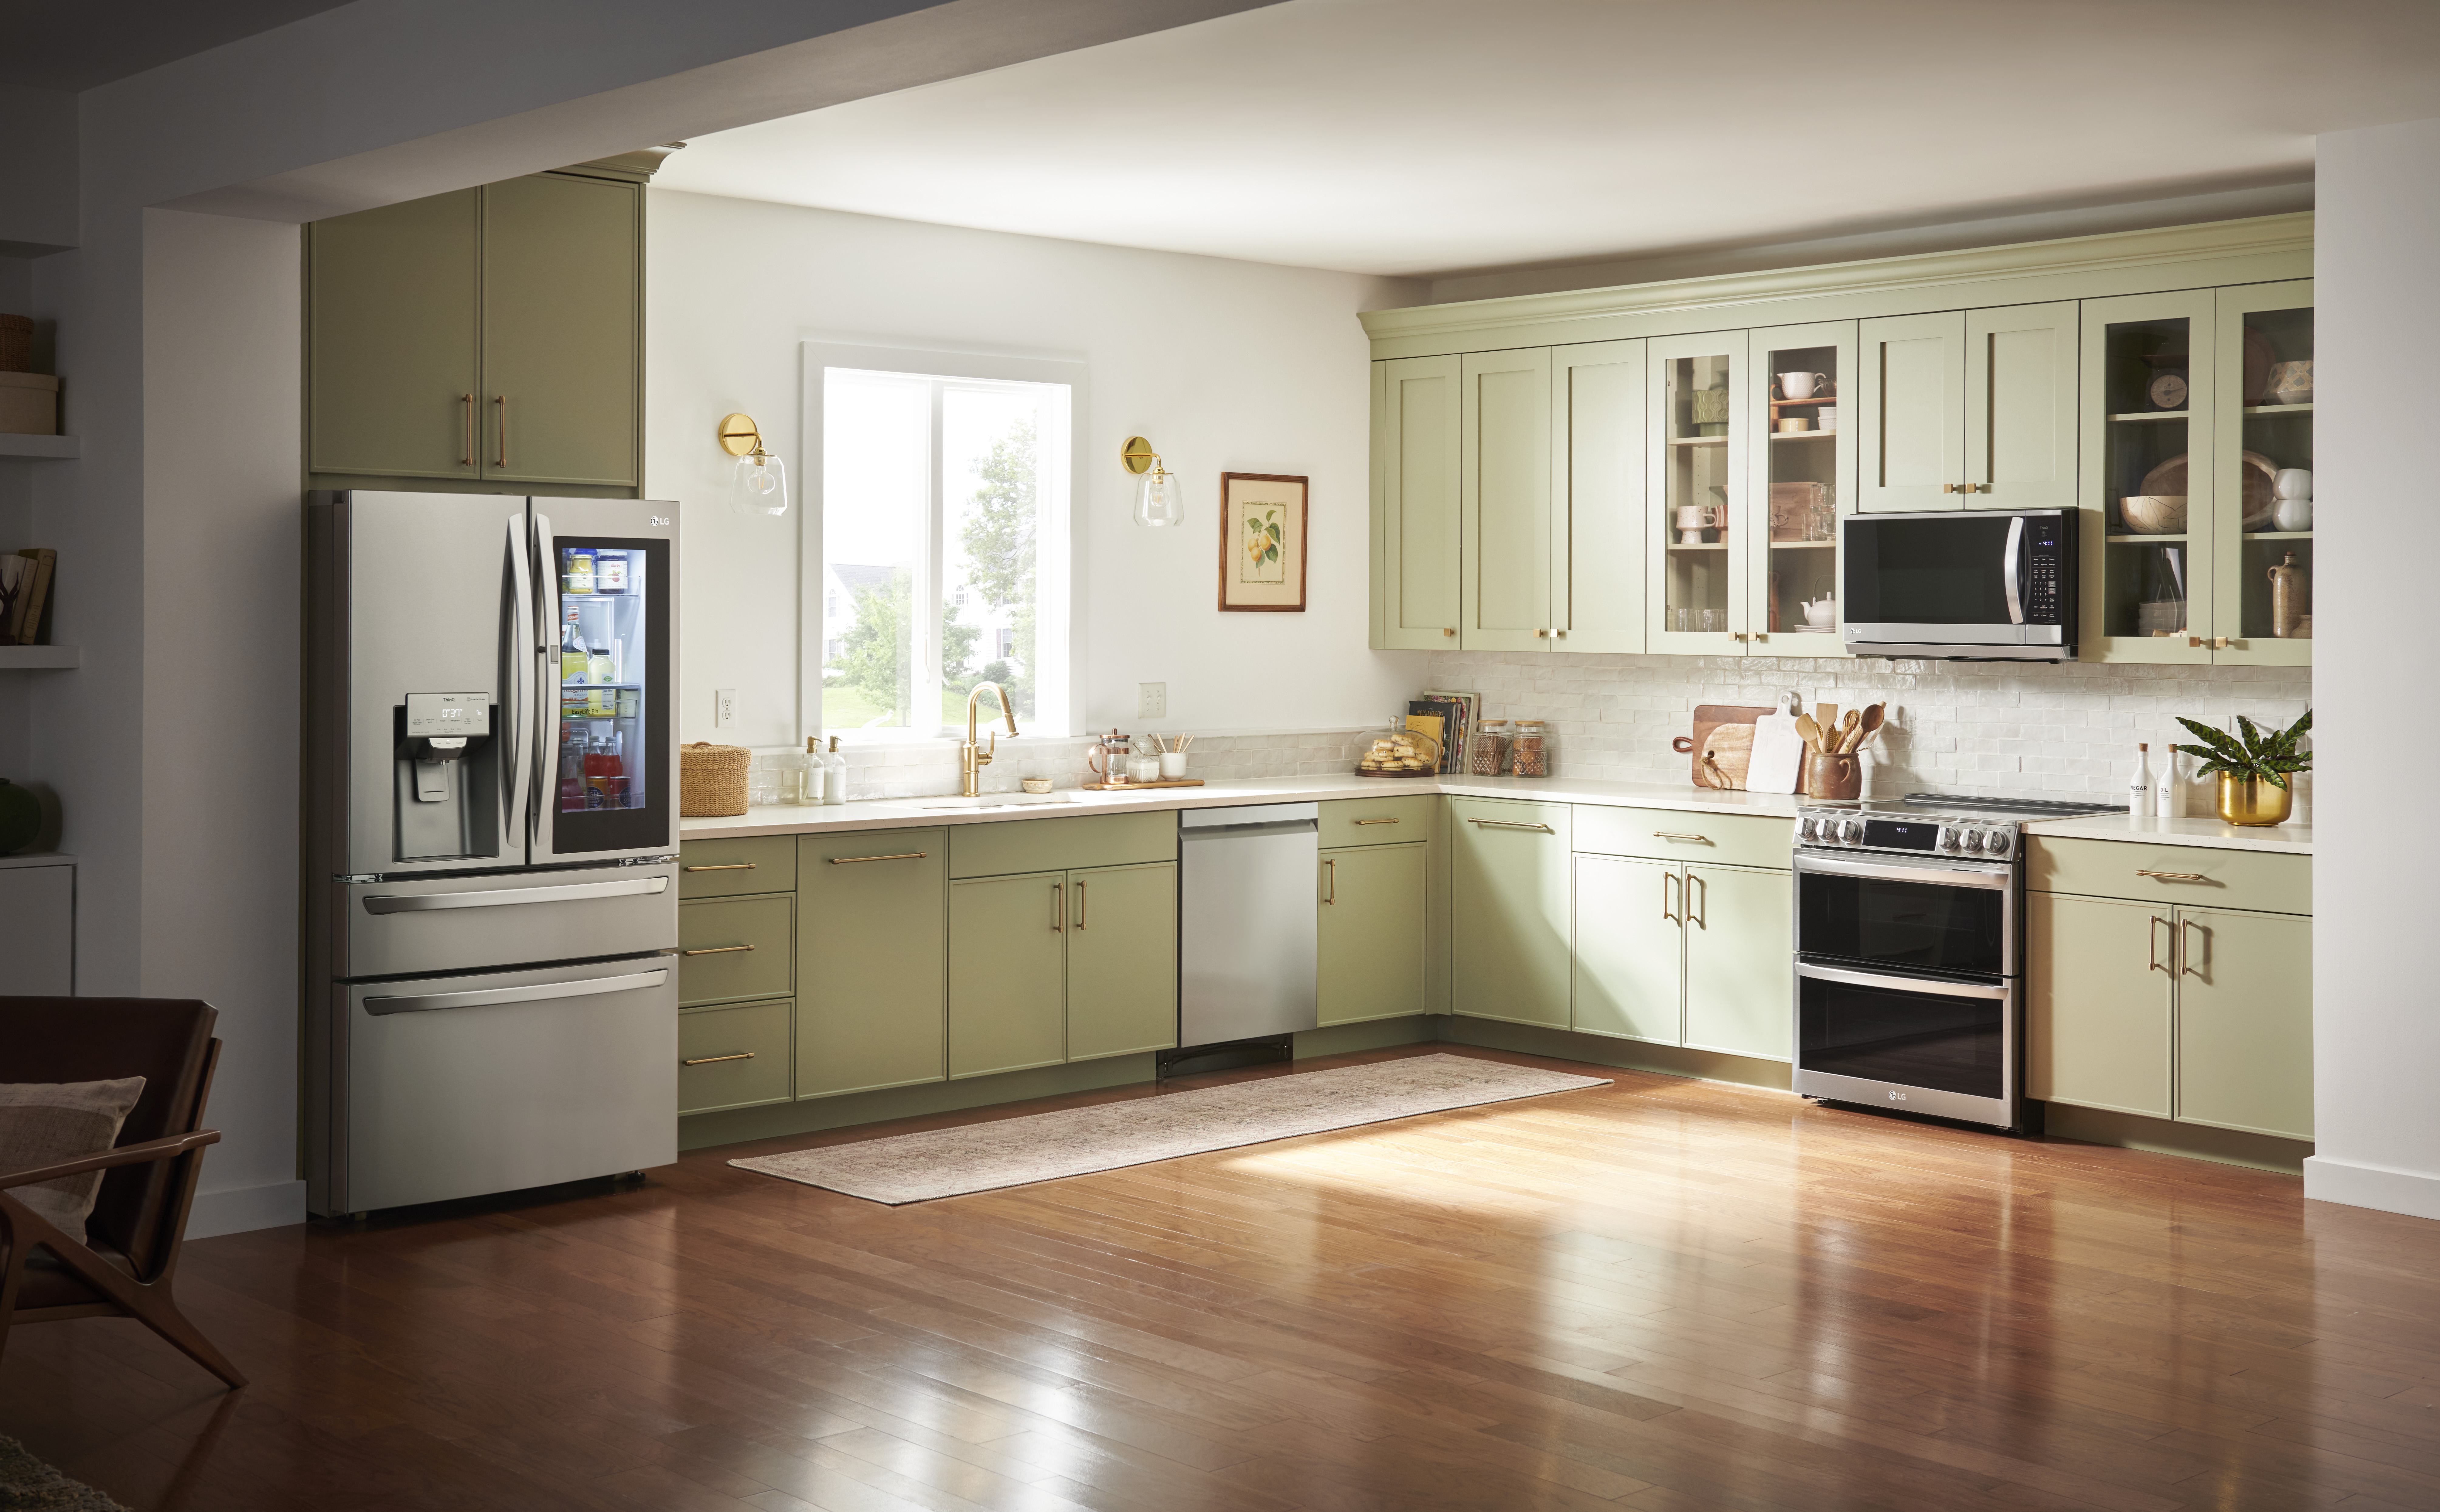 Home Appliance Deals for Contractors: Kitchen Packages, Arnold's Appliance